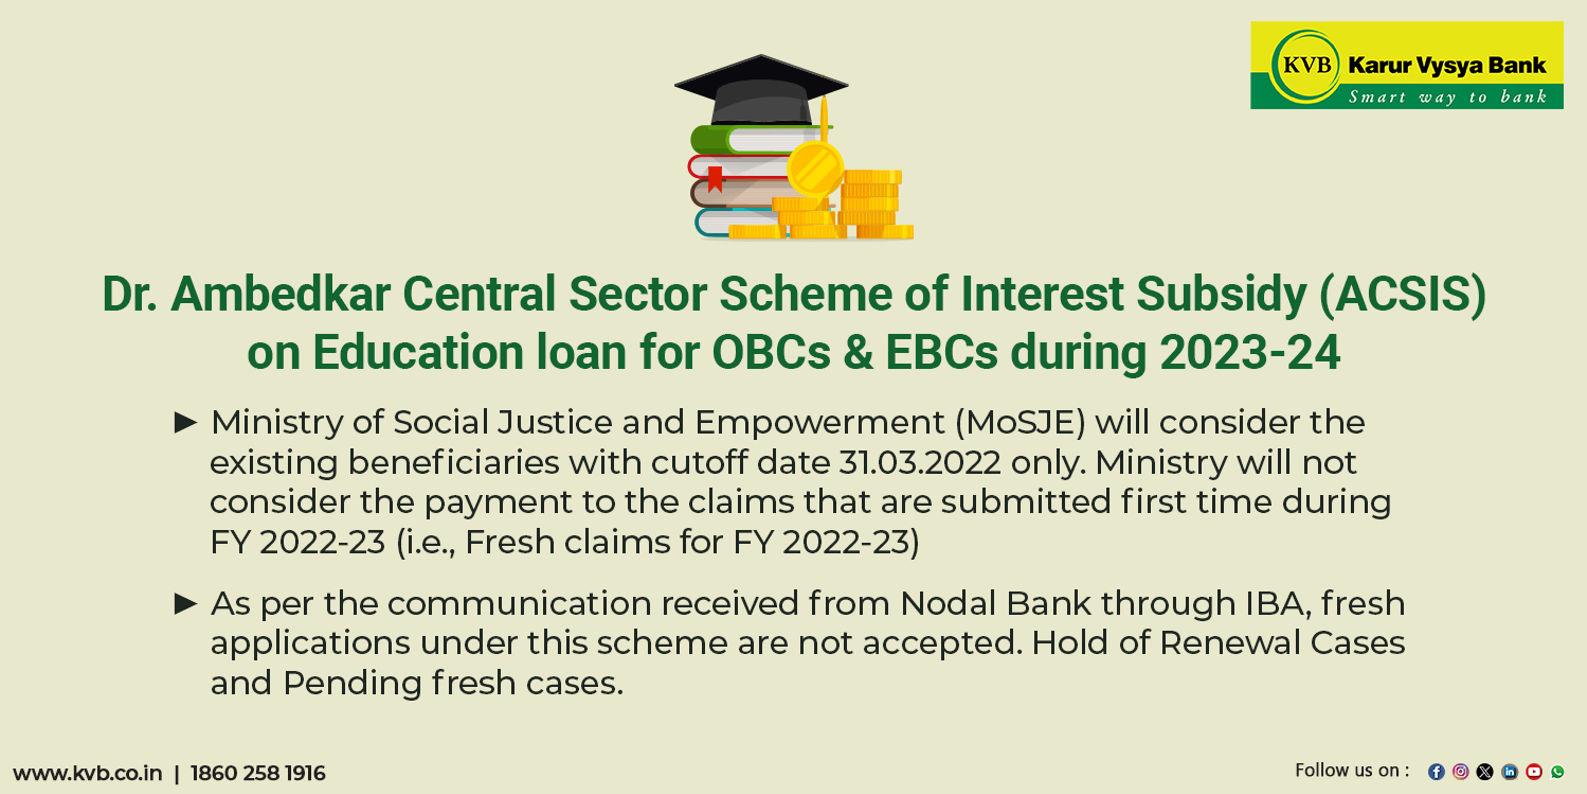 Dr. Ambedkar Central Sector Scheme of Interest Subsidy (ACSIS) on Education loan for OBC and EBC Students